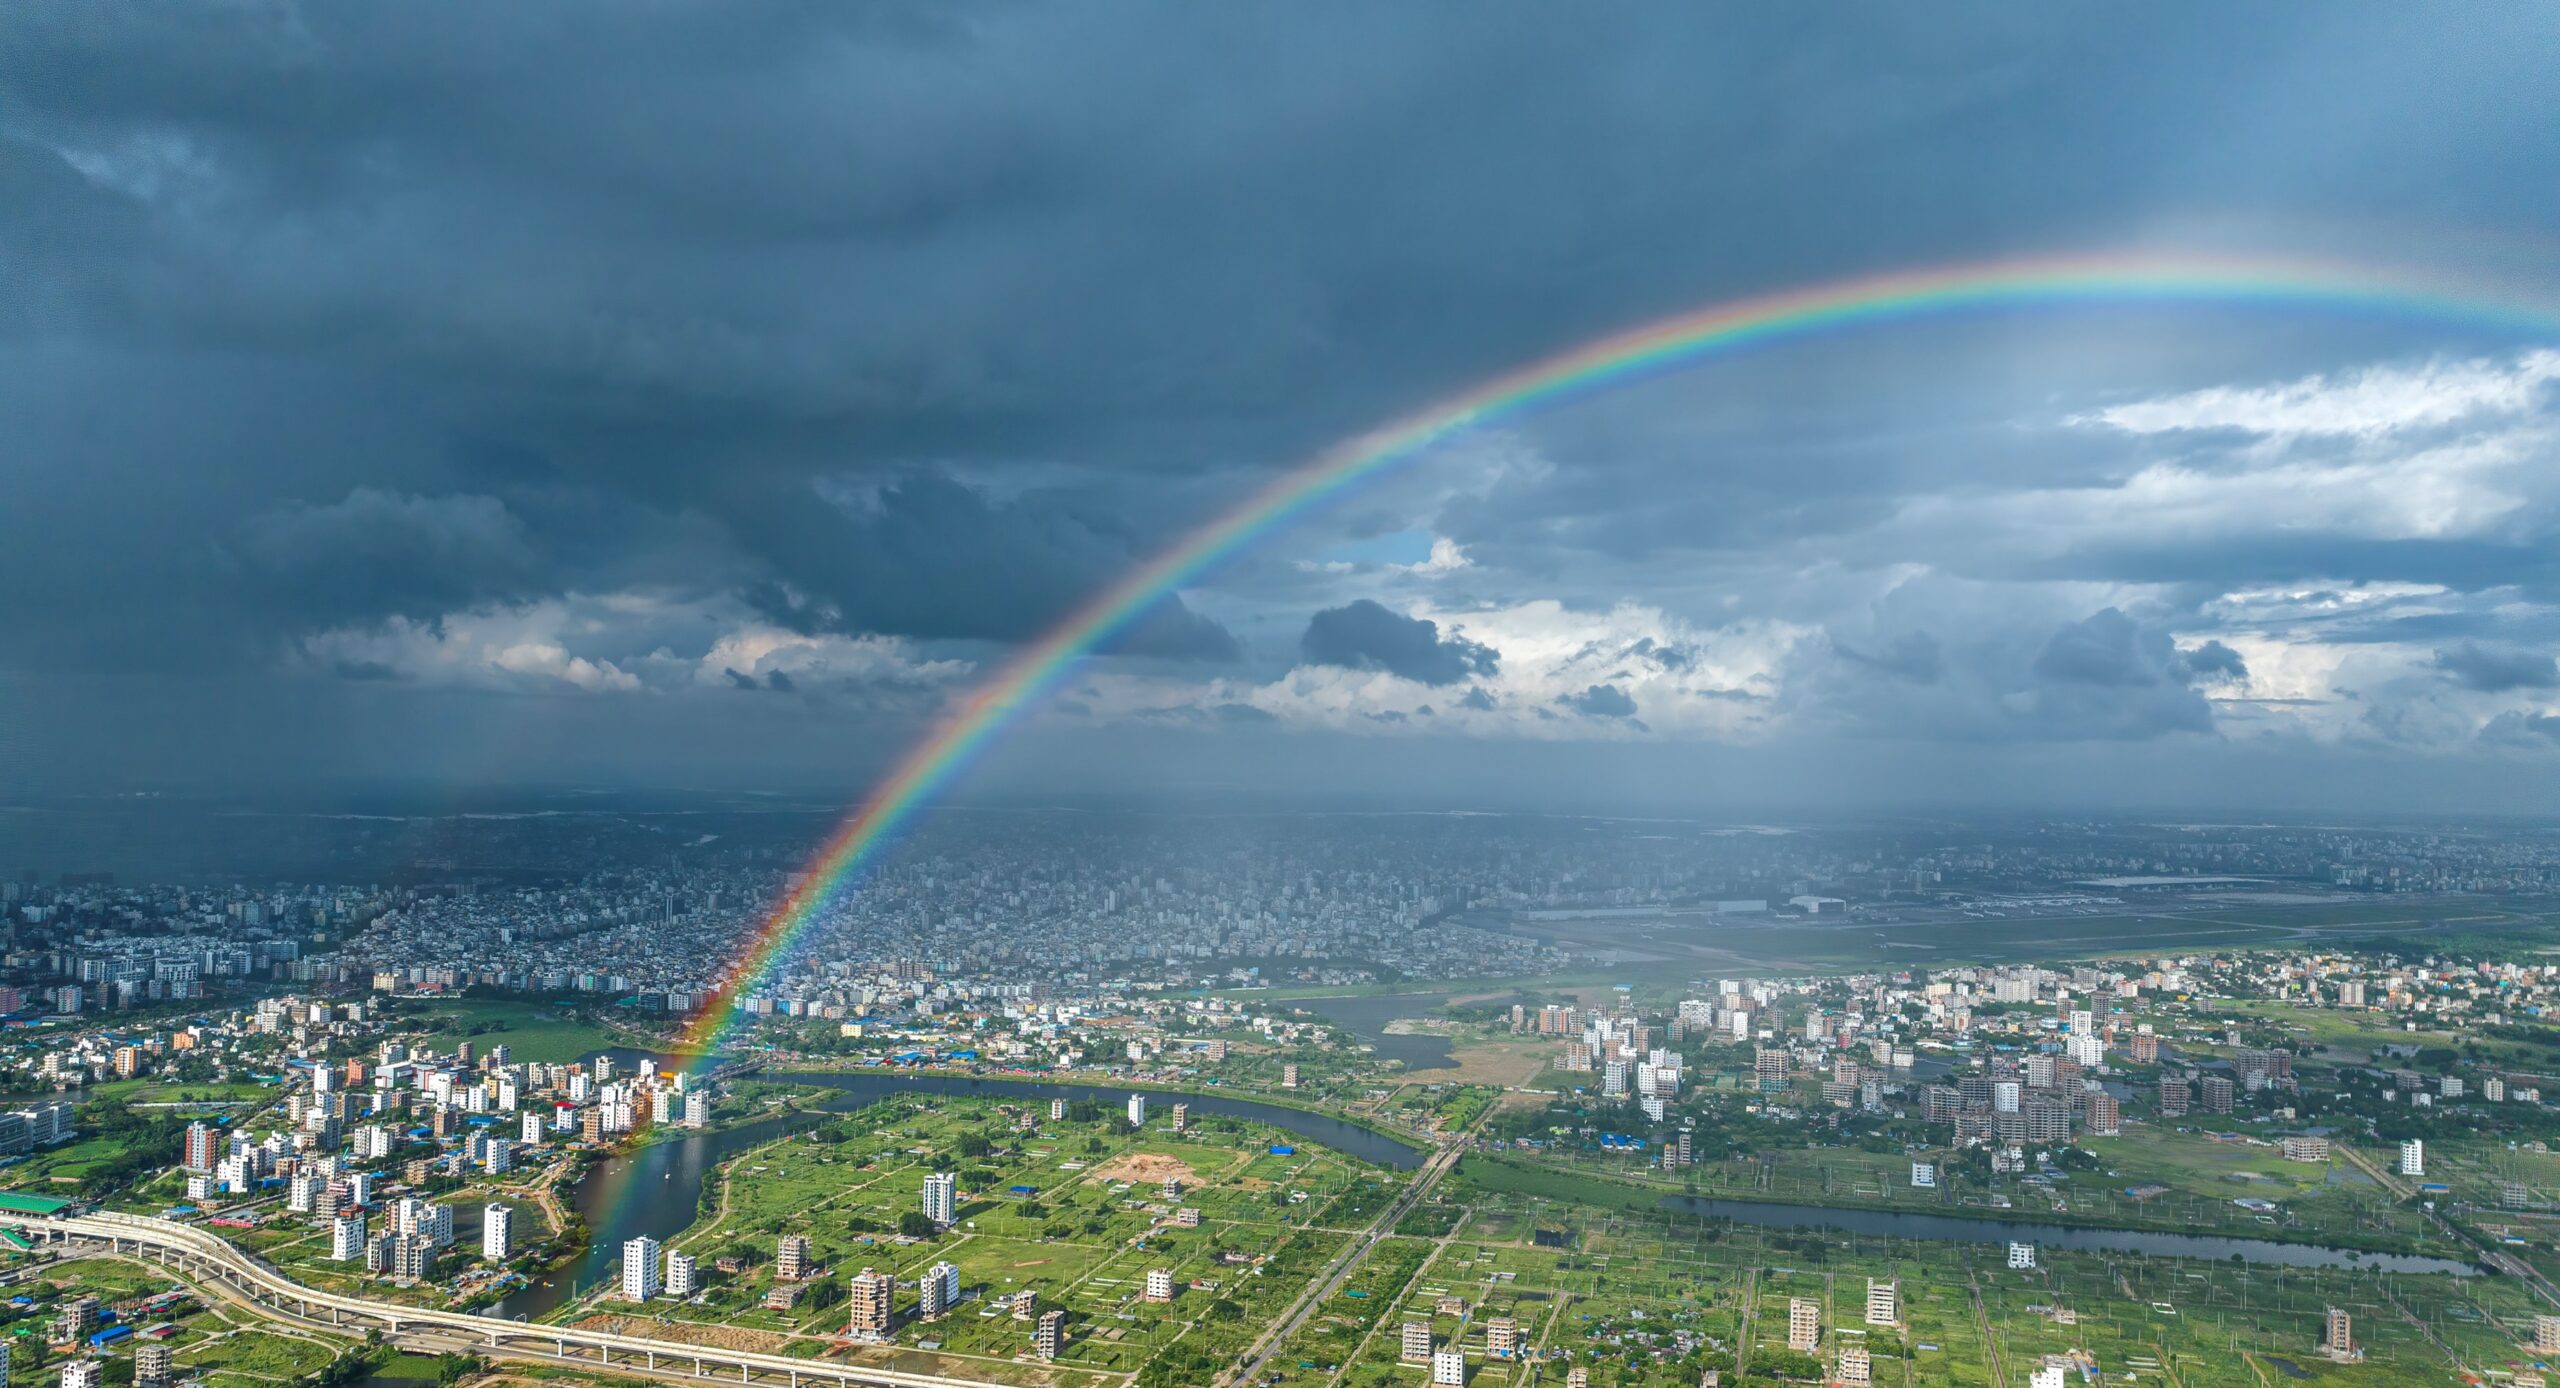 A rainbow over a city, shown from above